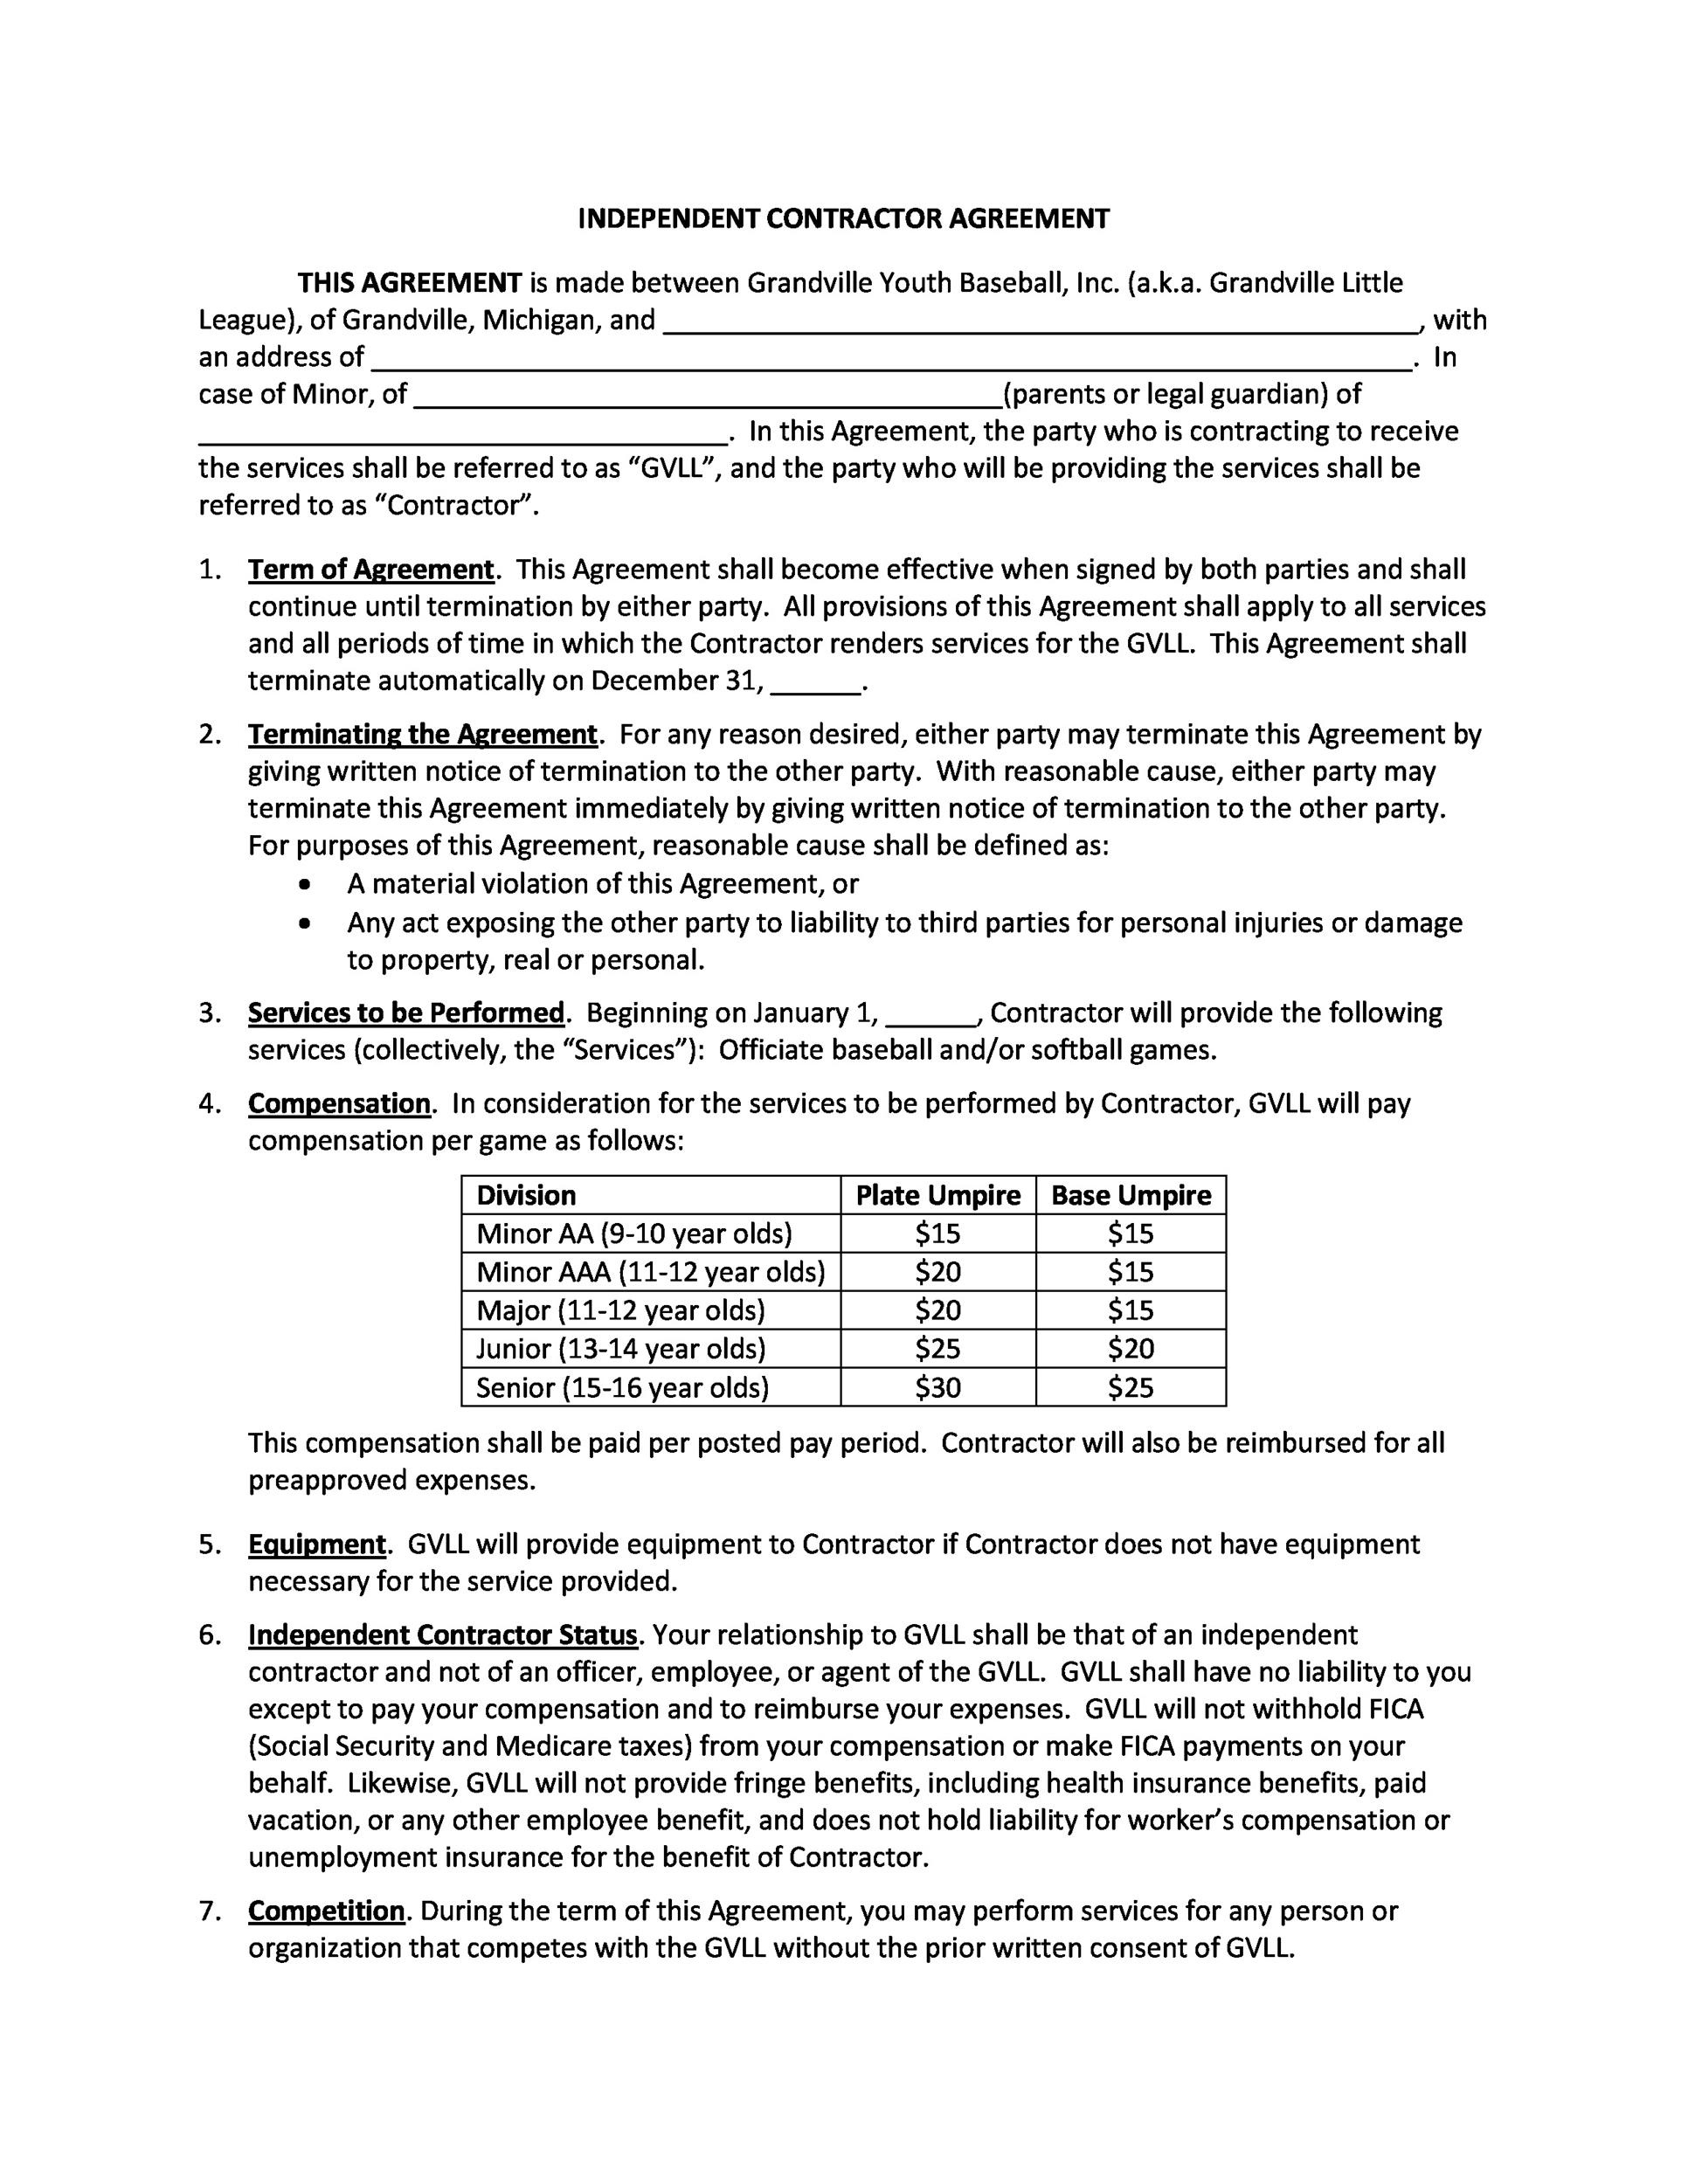 Free independent contractor agreement 07